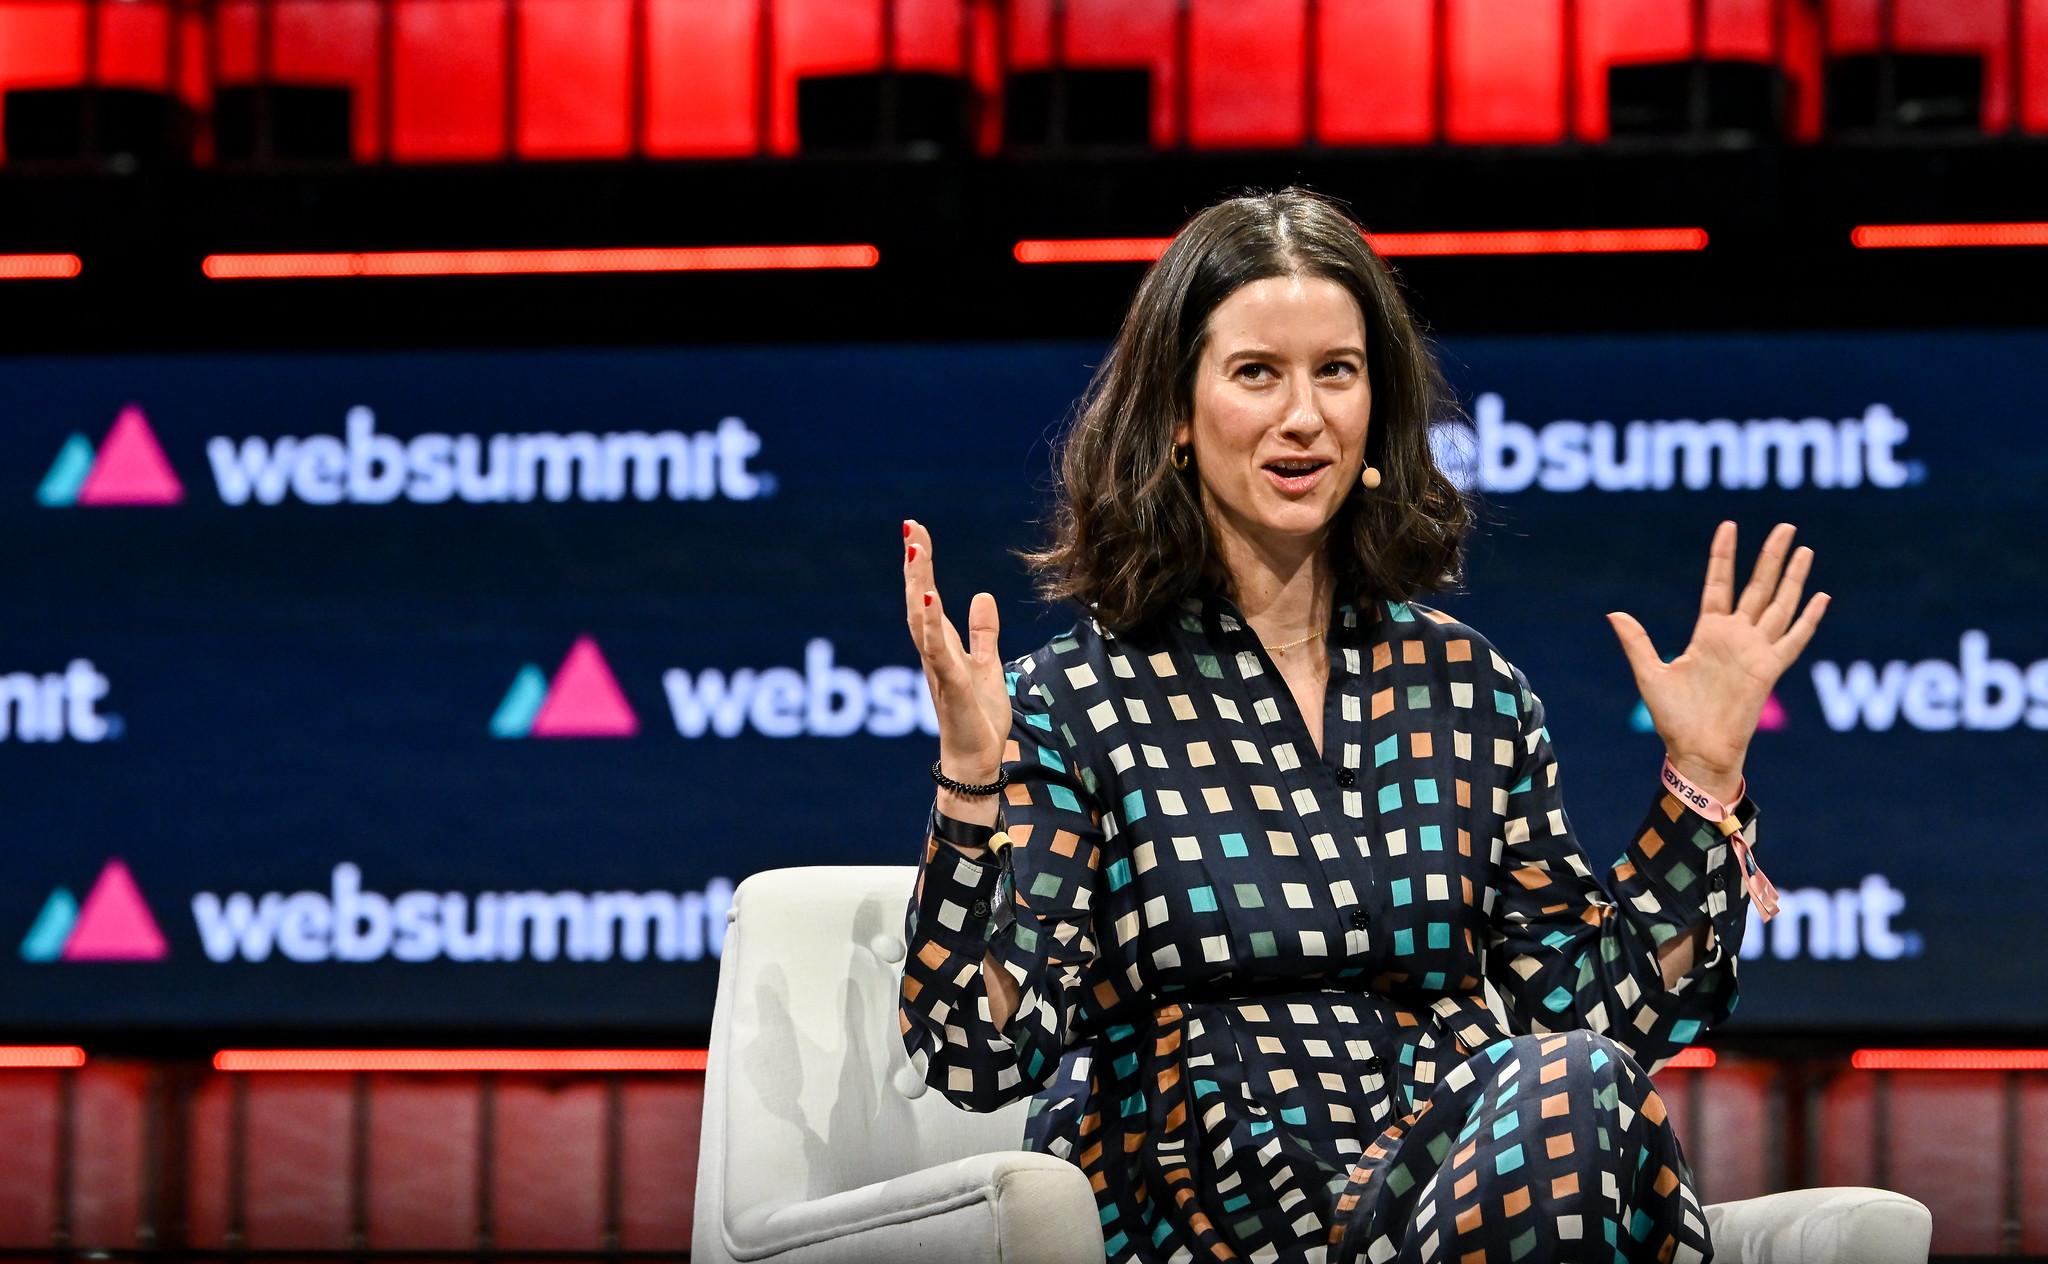 Cristina Fonseca, Managing Partner, Indico Capital Partners, during the opening night of Web Summit 2023 at the Altice Arena in Lisbon, Portugal